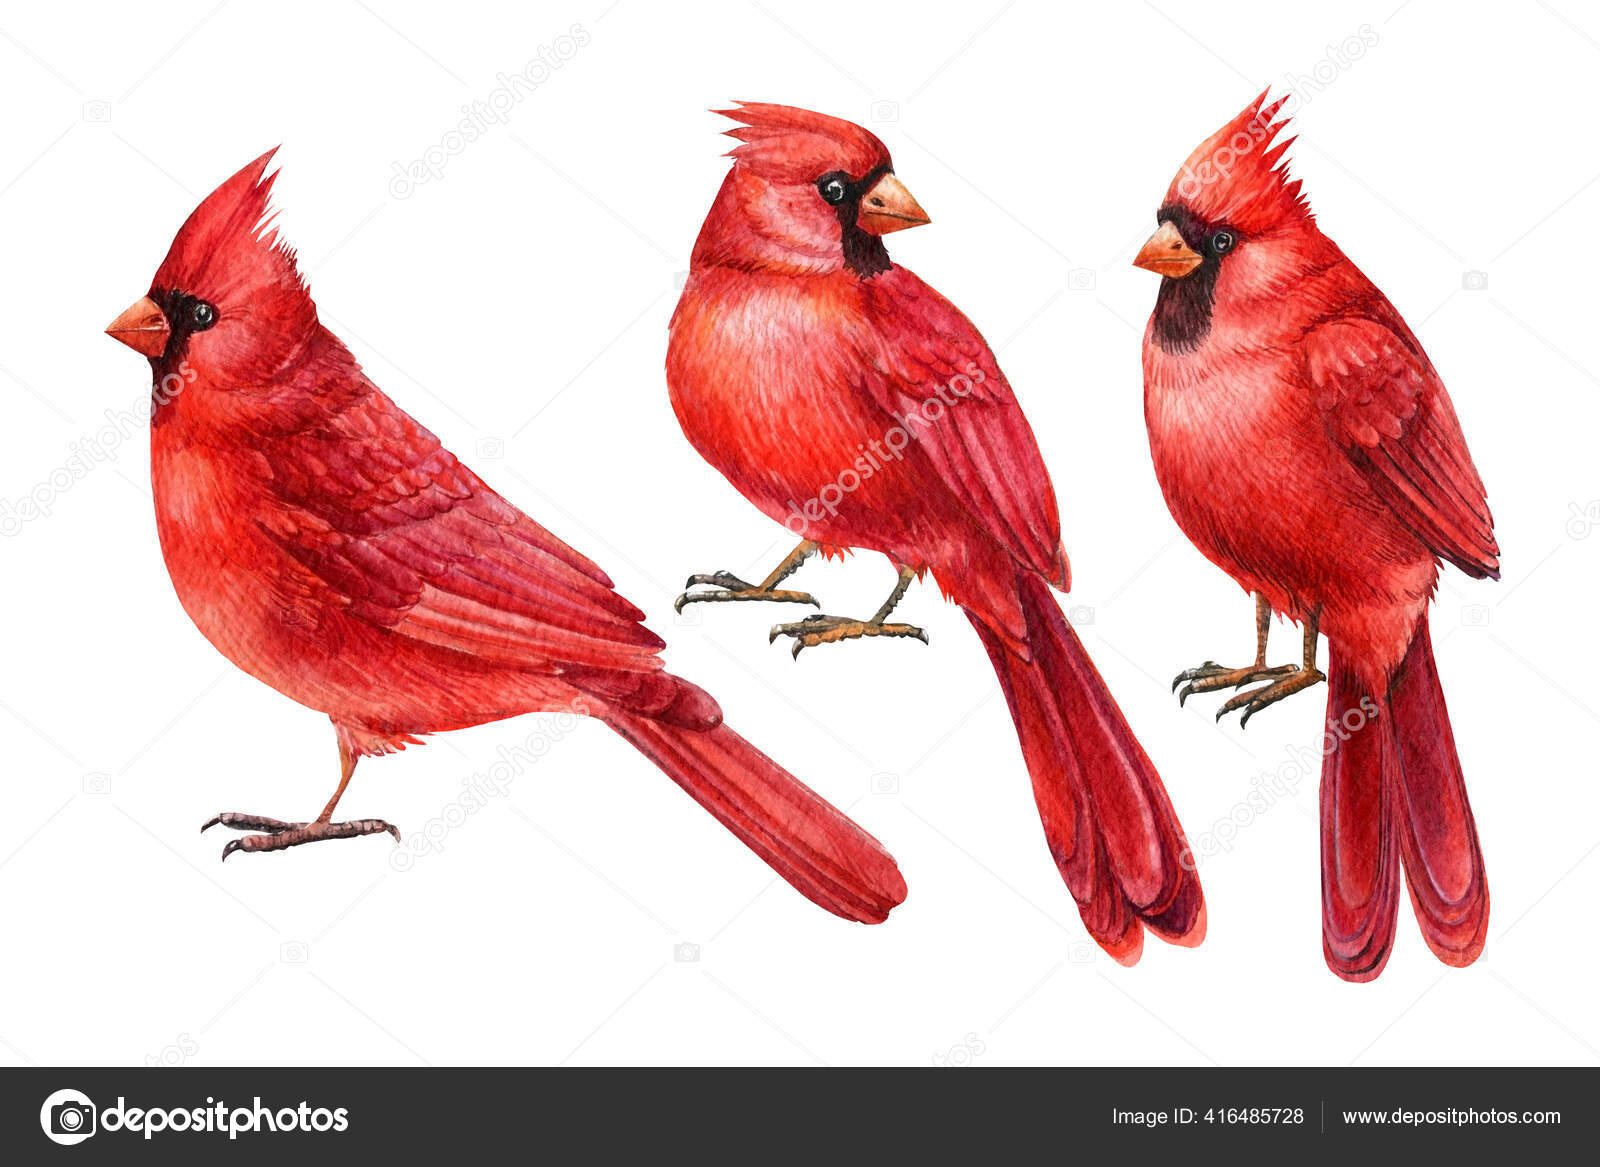 Red Cardinals Birds Set On White Isolated Background Watercolor Drawings Stock Photo By C Gringoann